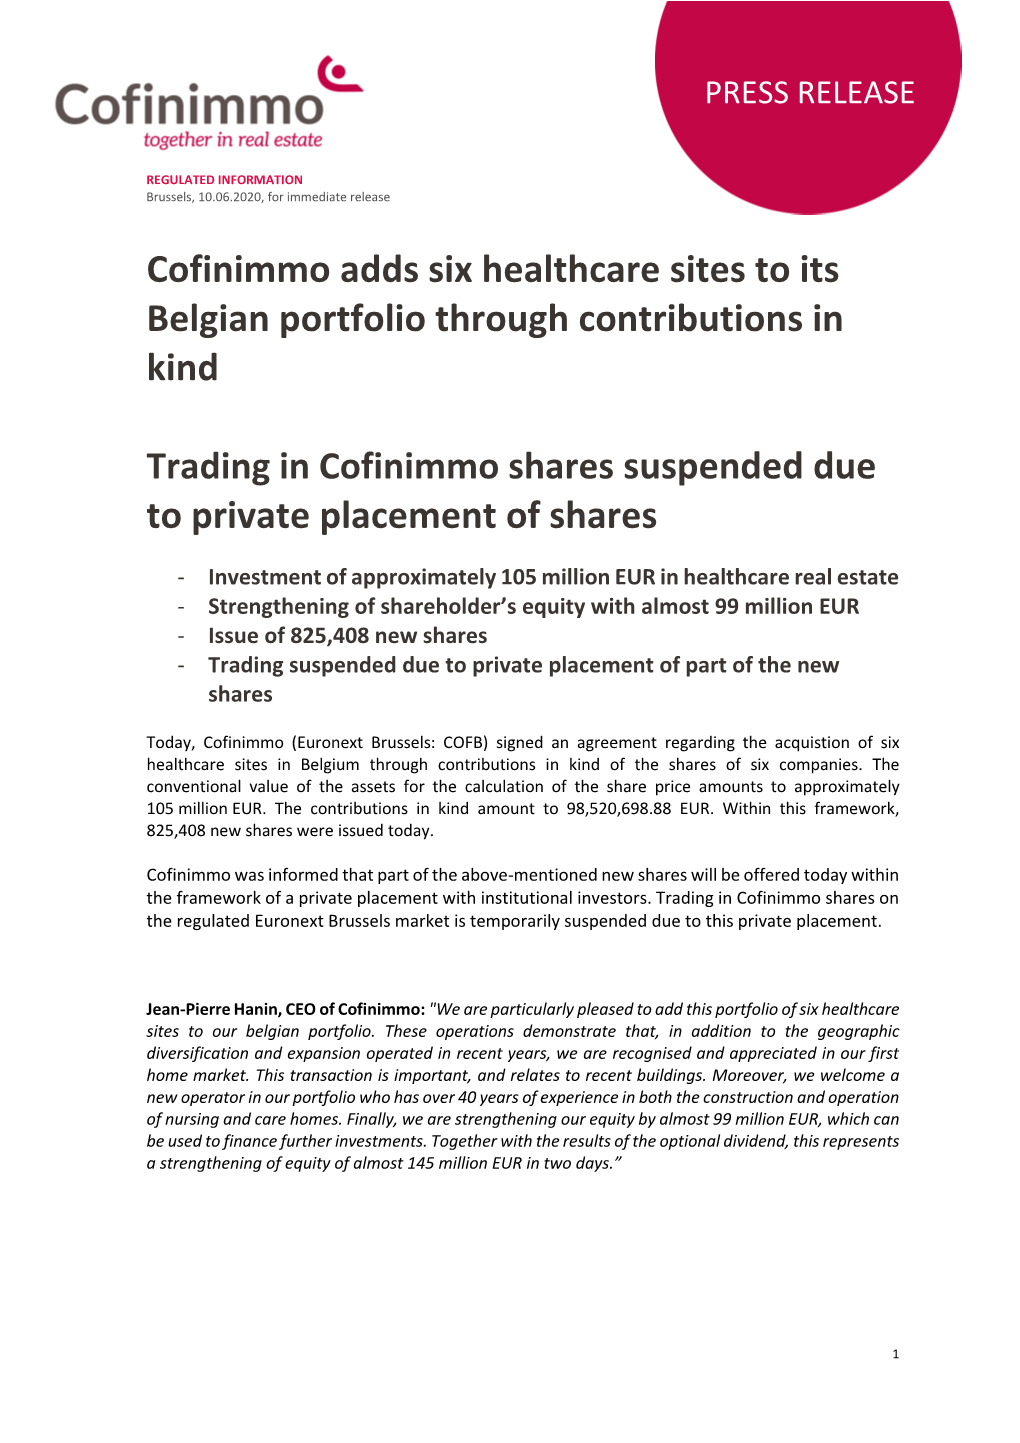 Cofinimmo Adds Six Healthcare Sites to Its Belgian Portfolio Through Contributions in Kind to Private Placement of Shares